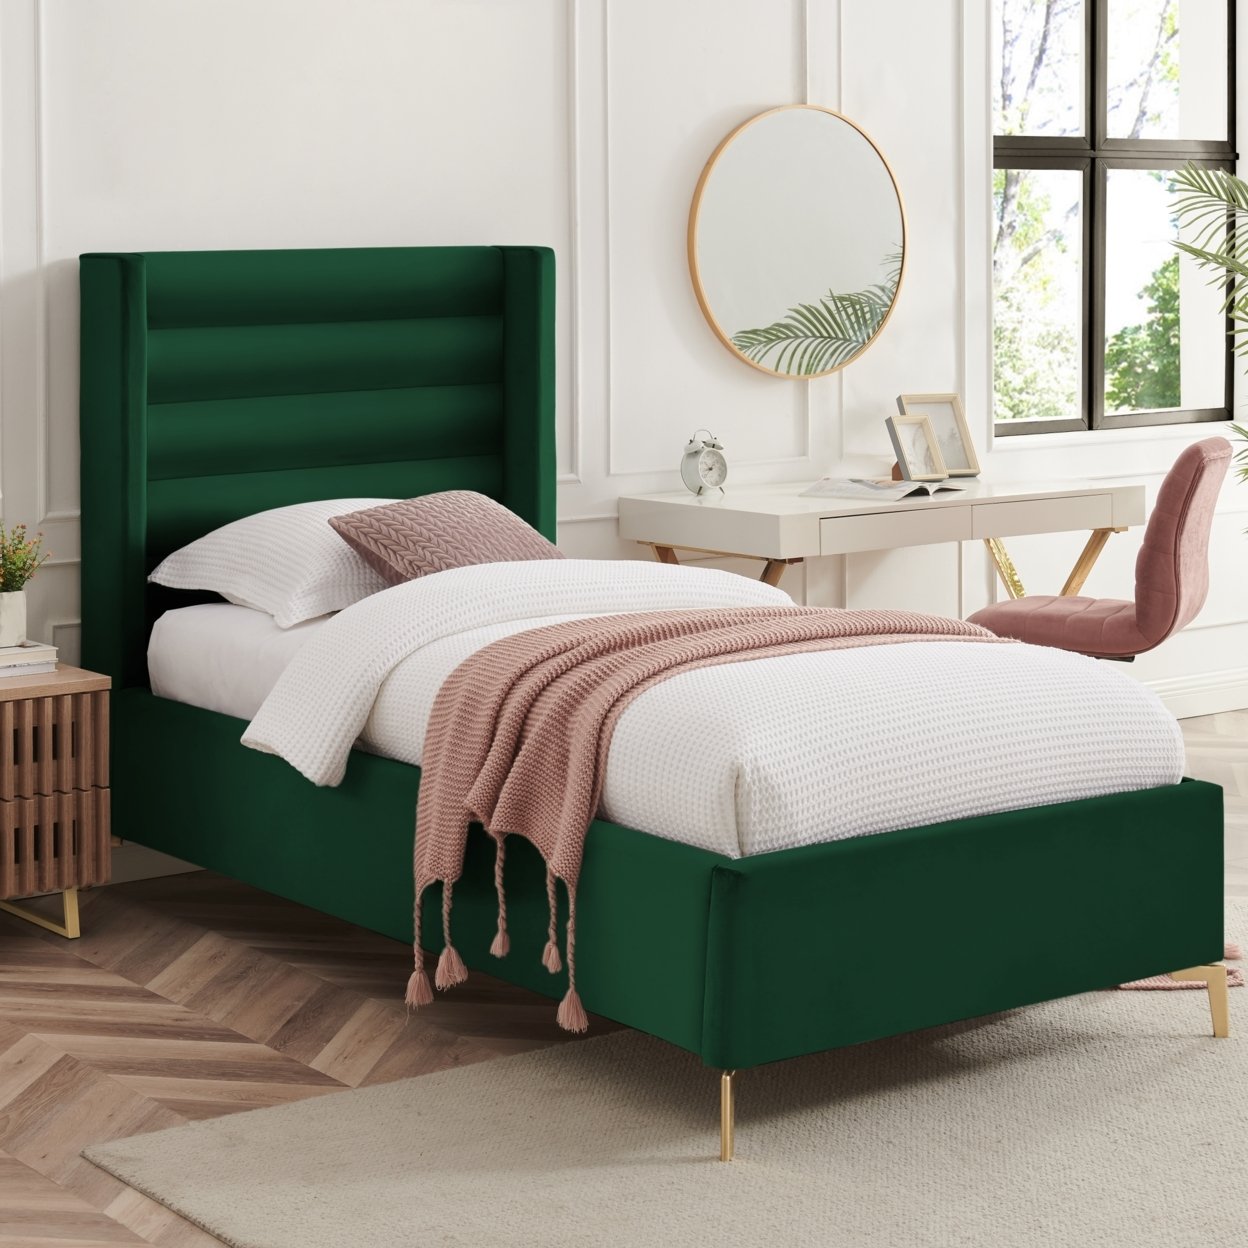 Rayce Bed -Velvet Upholstered, Wingback Channel Tufted Headboard, Oblique Legs, Slats Included - Green, Twin Xl